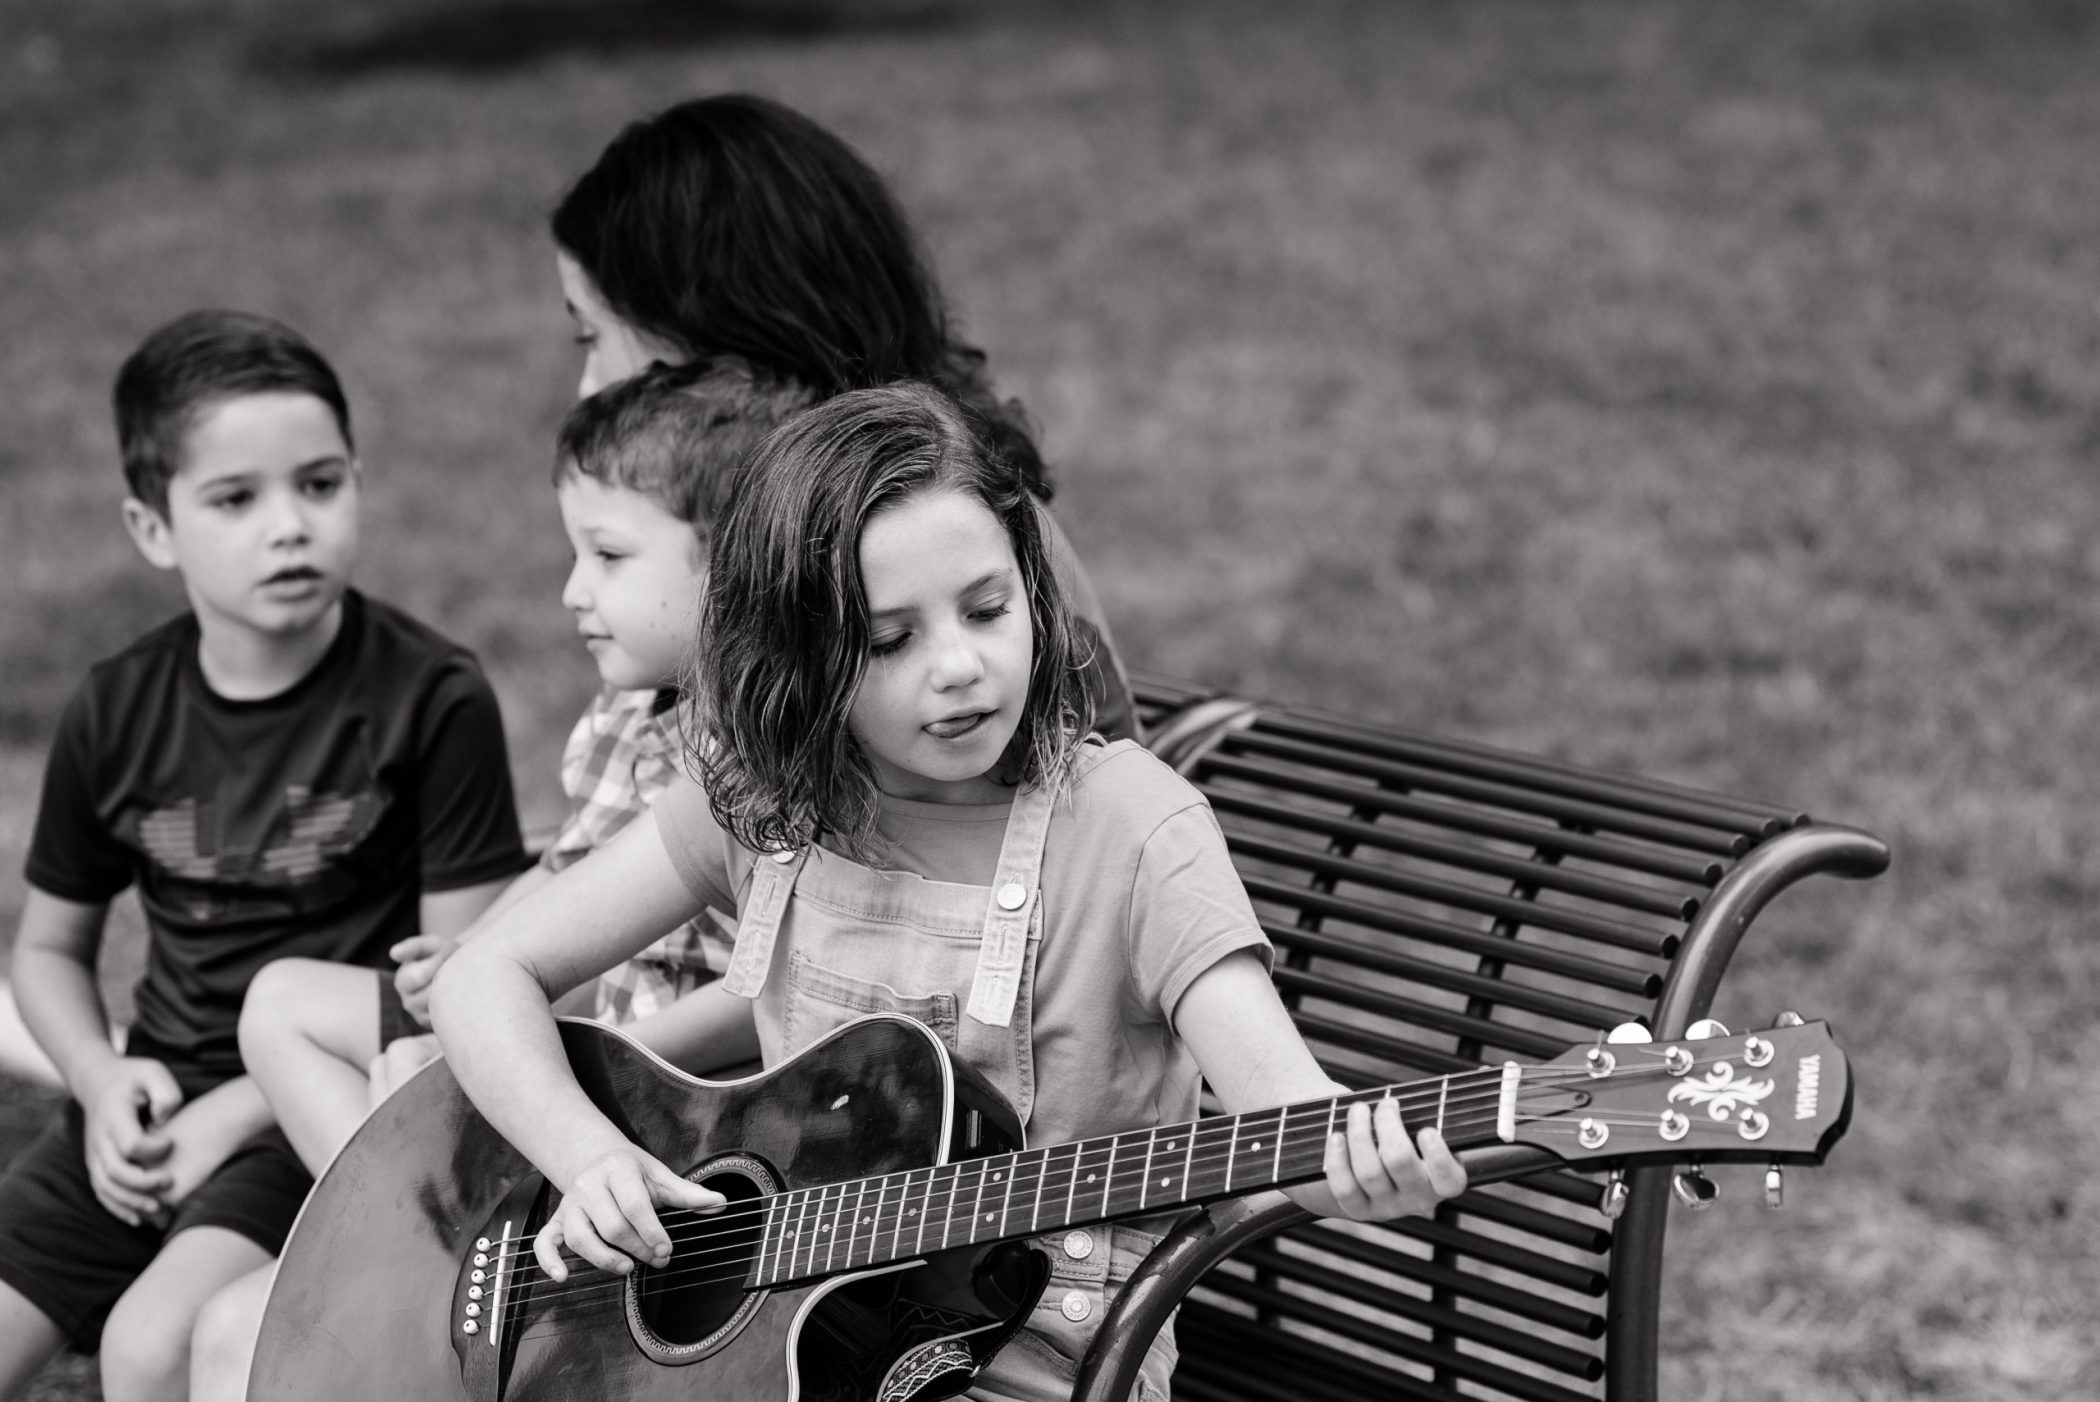 Claire, daughter of DC widow blog writer Marjorie Brimley, plays guitar